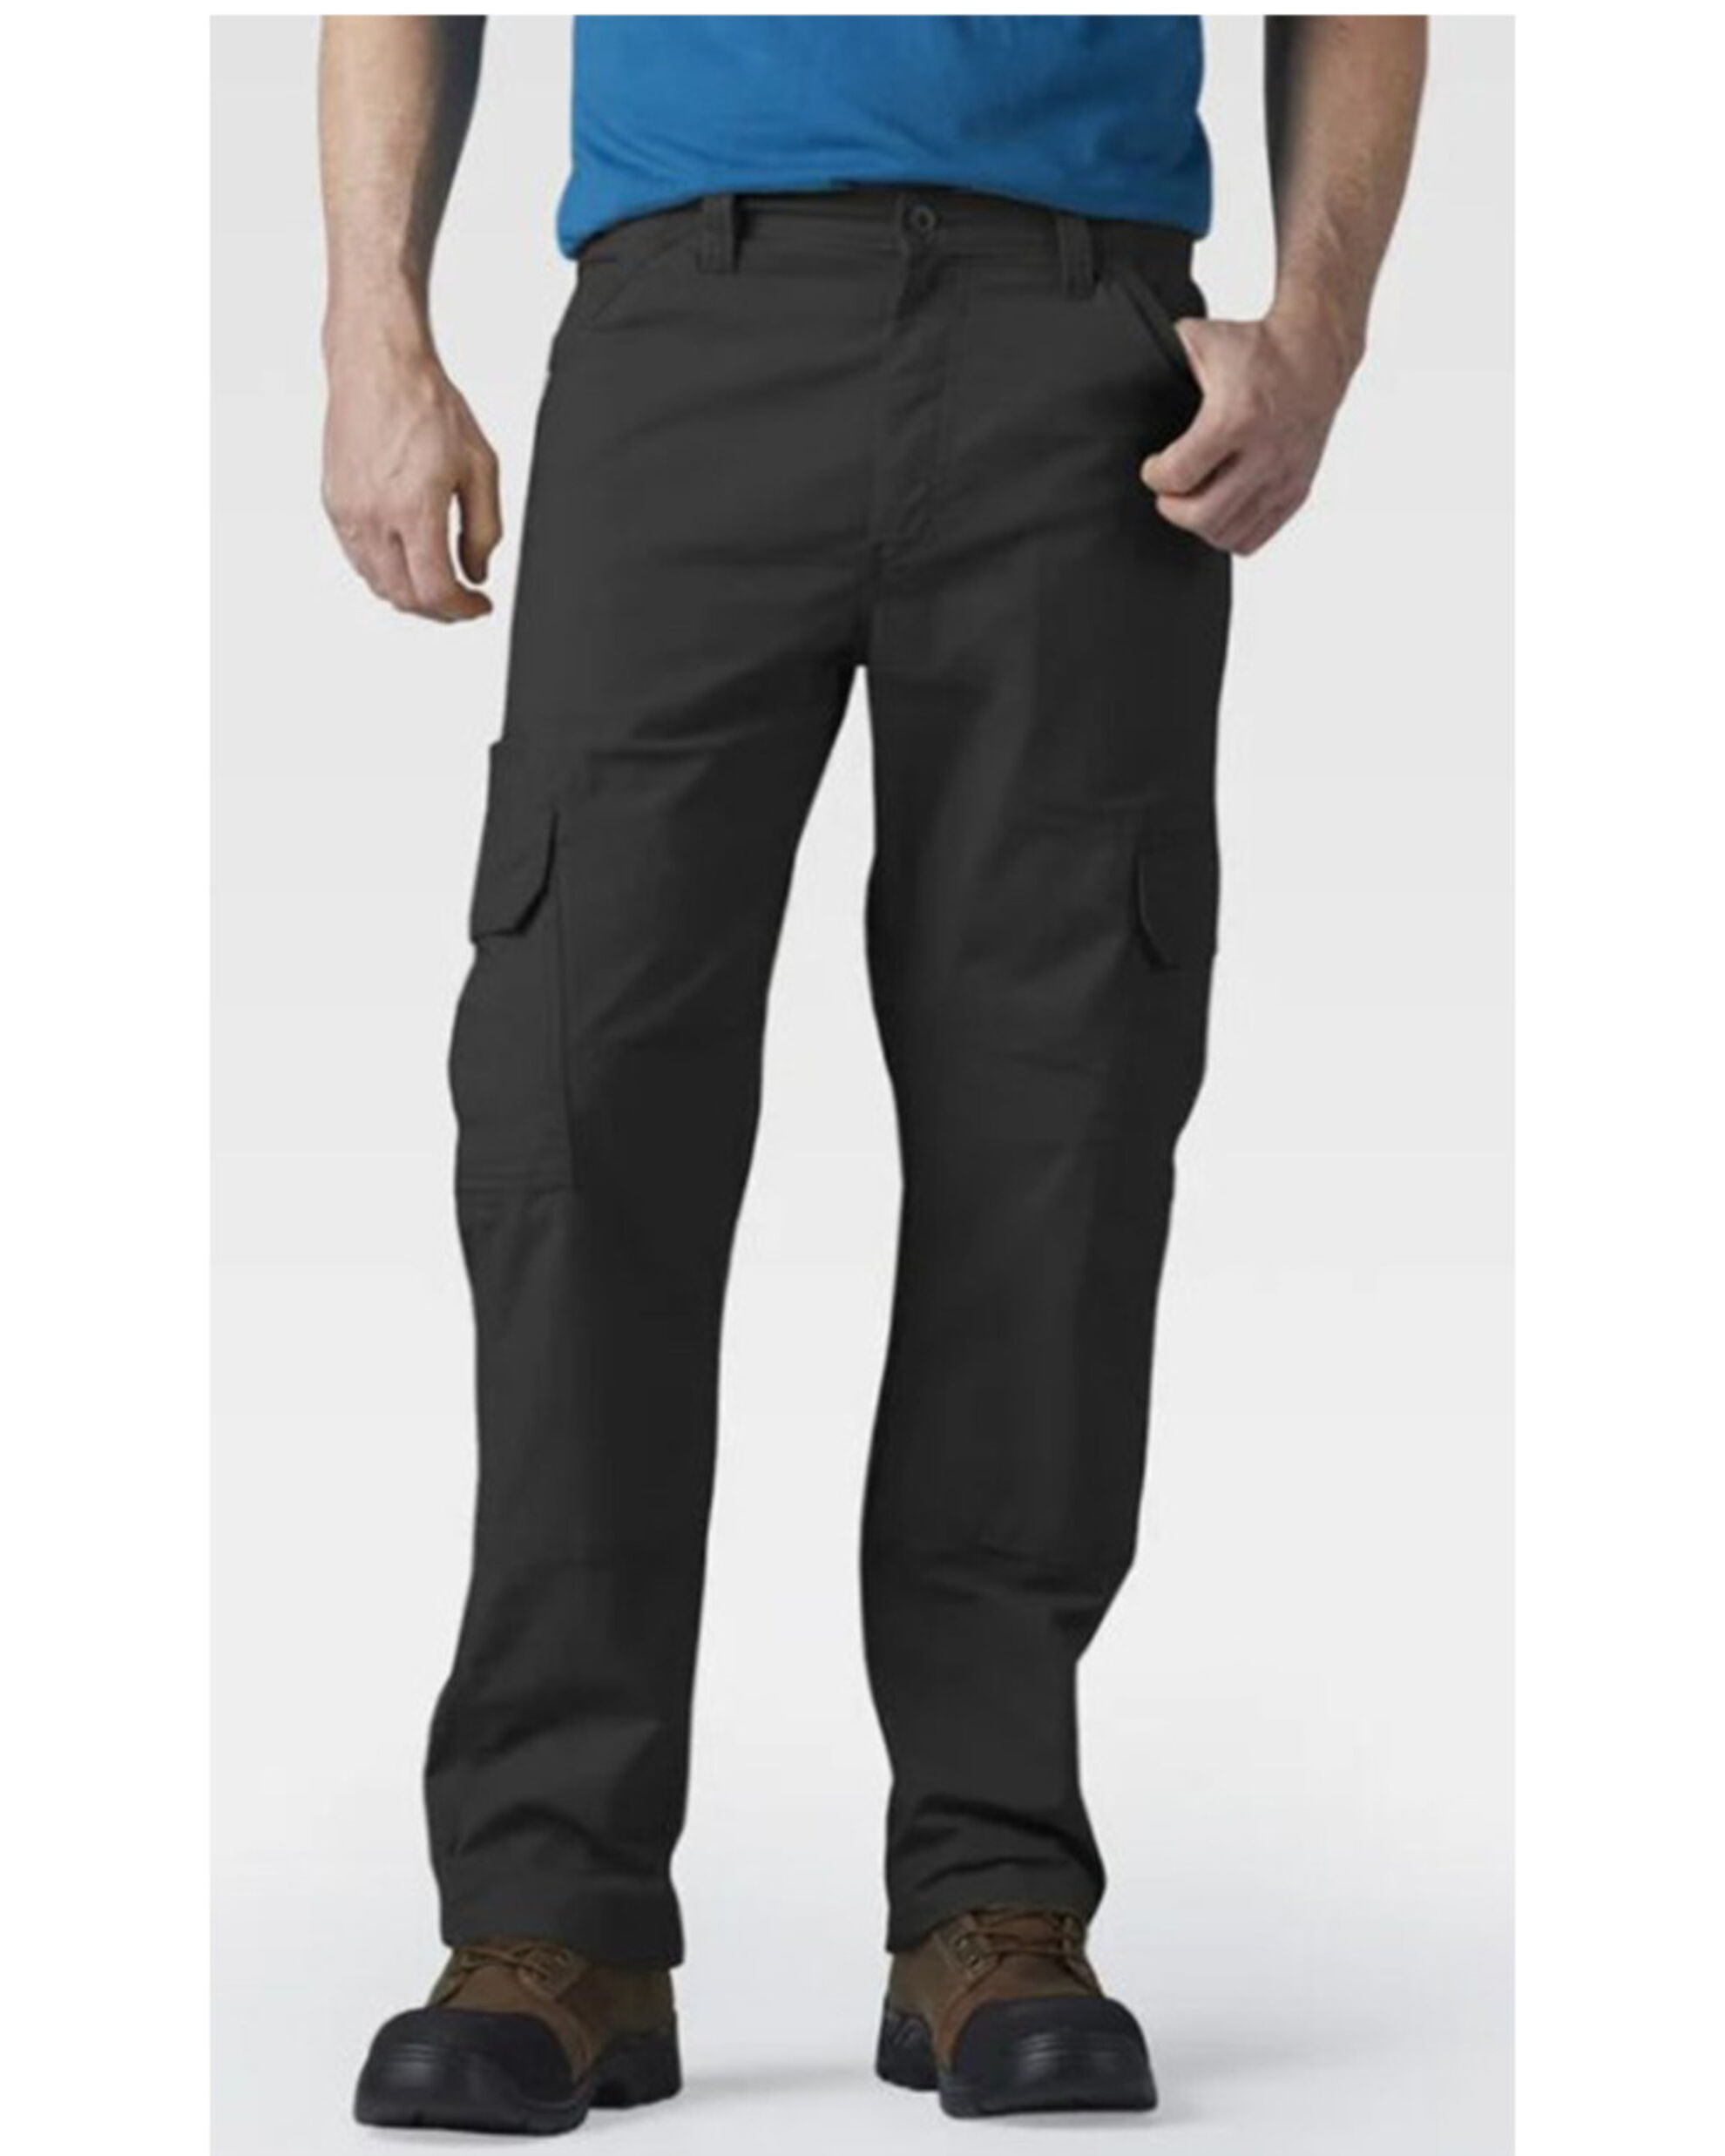 simply complicated mechanic cargo pant 2